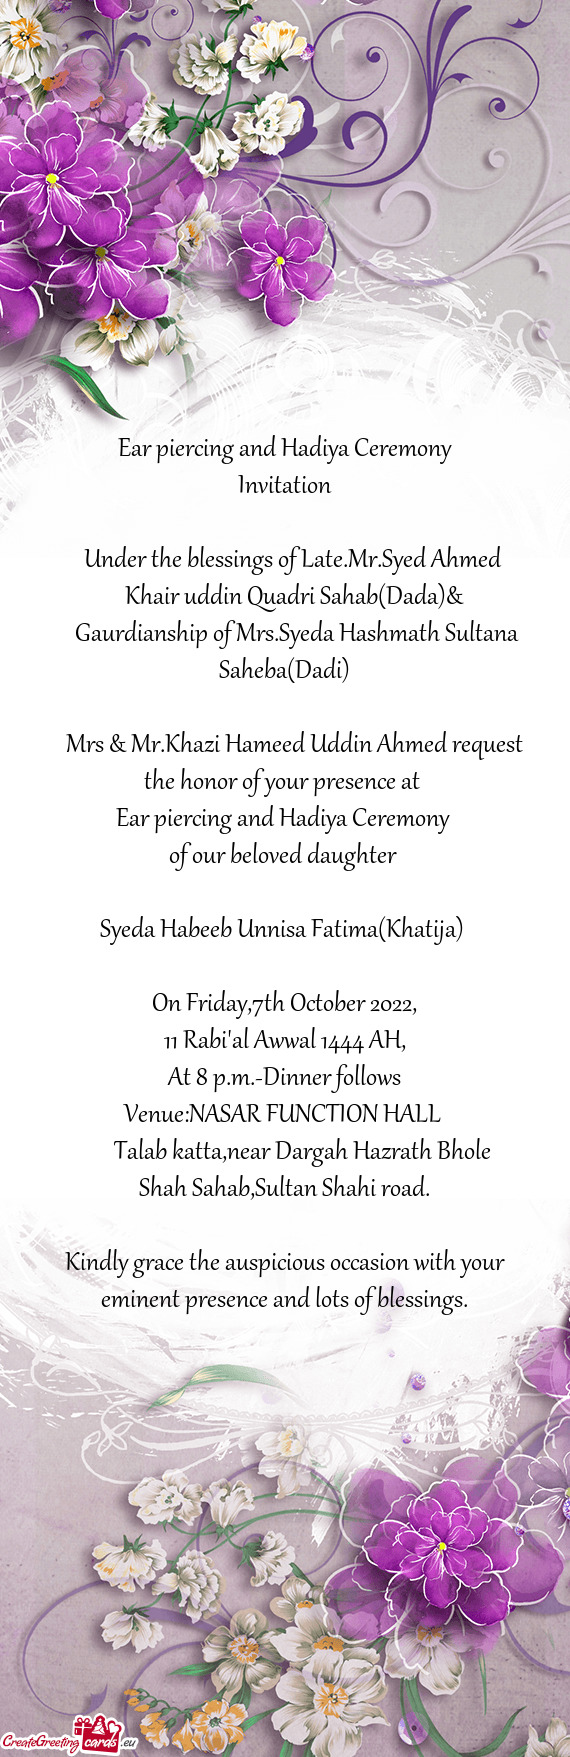 Under the blessings of Late.Mr.Syed Ahmed